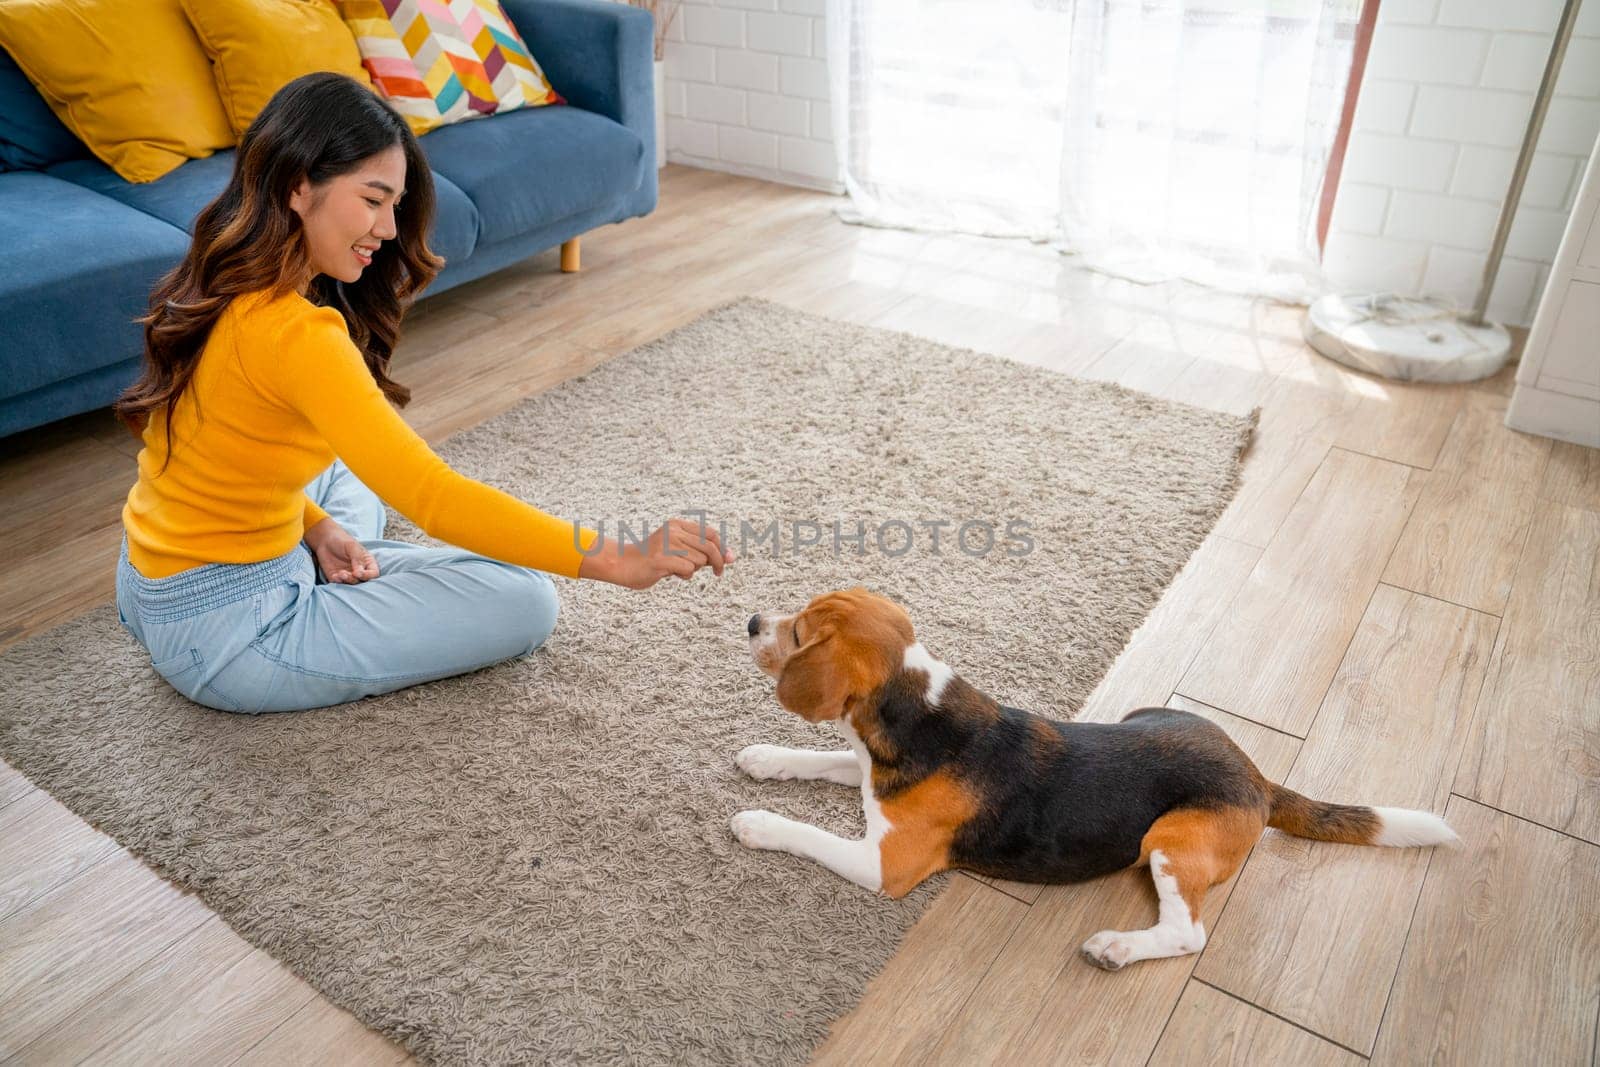 Young Asian girl fun and enjoy to play with beagle dog in living room of her house by give some candy or dog food to the dog.